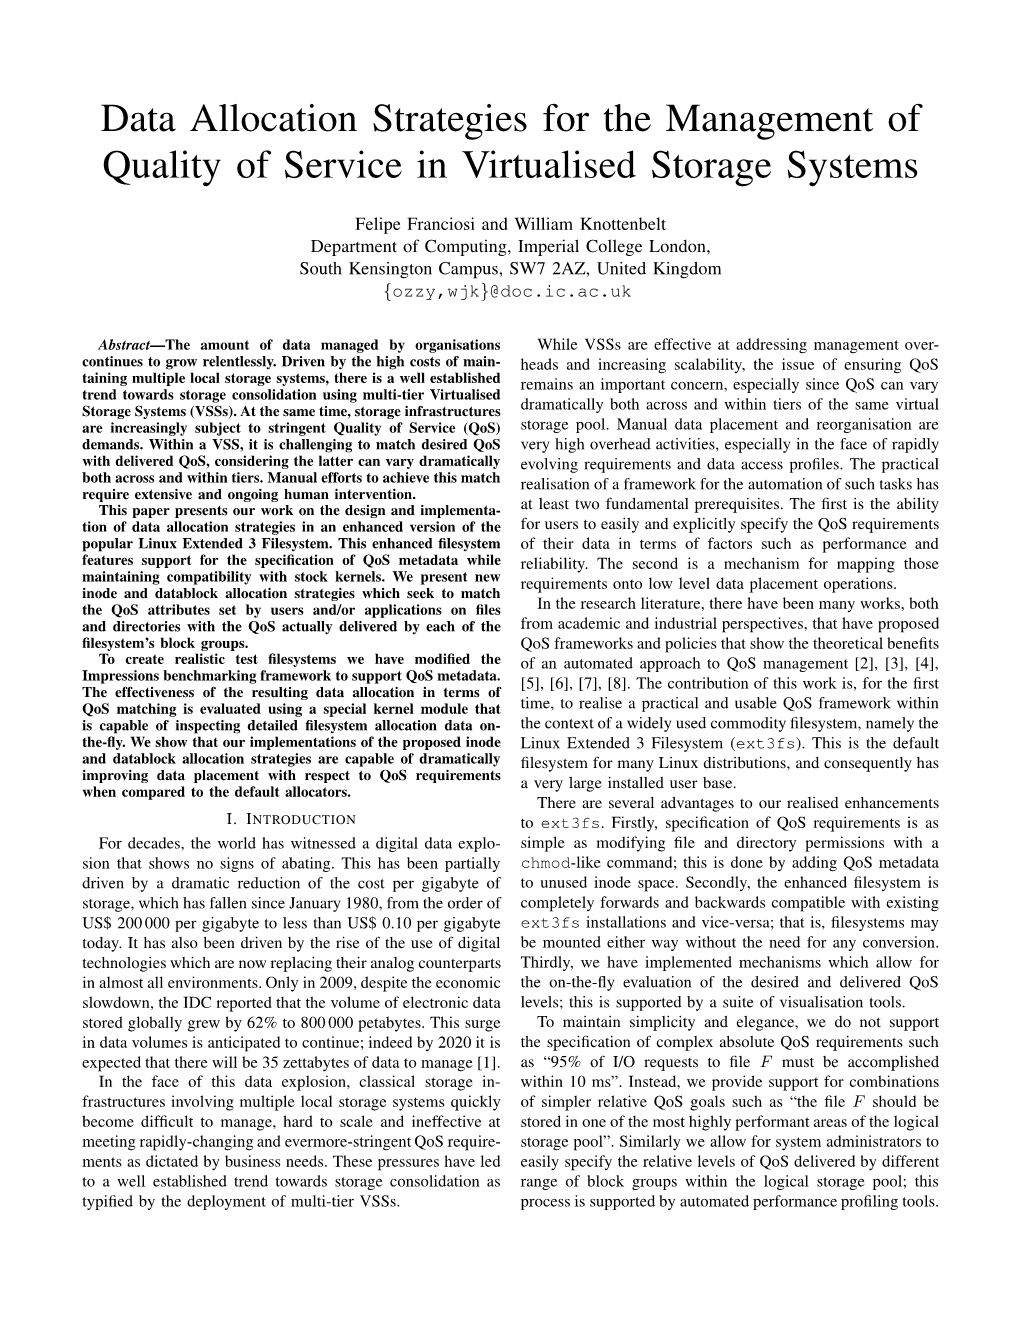 Data Allocation Strategies for the Management of Quality of Service in Virtualised Storage Systems